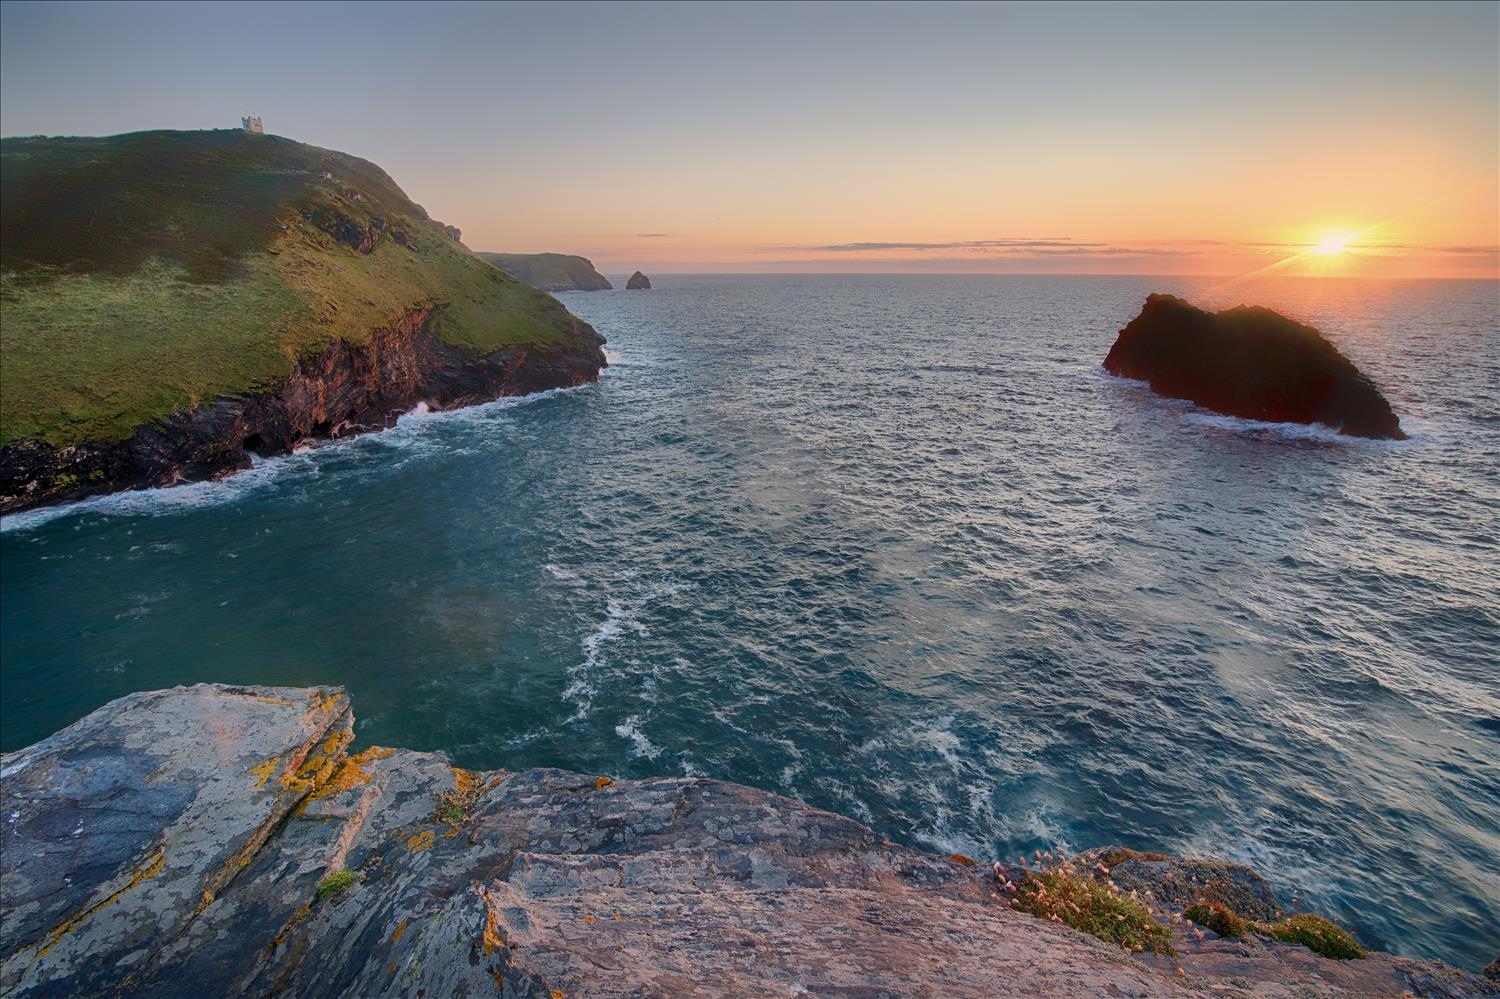 The entrance to Boscastle harbour as the sun sets over the Atlantic.